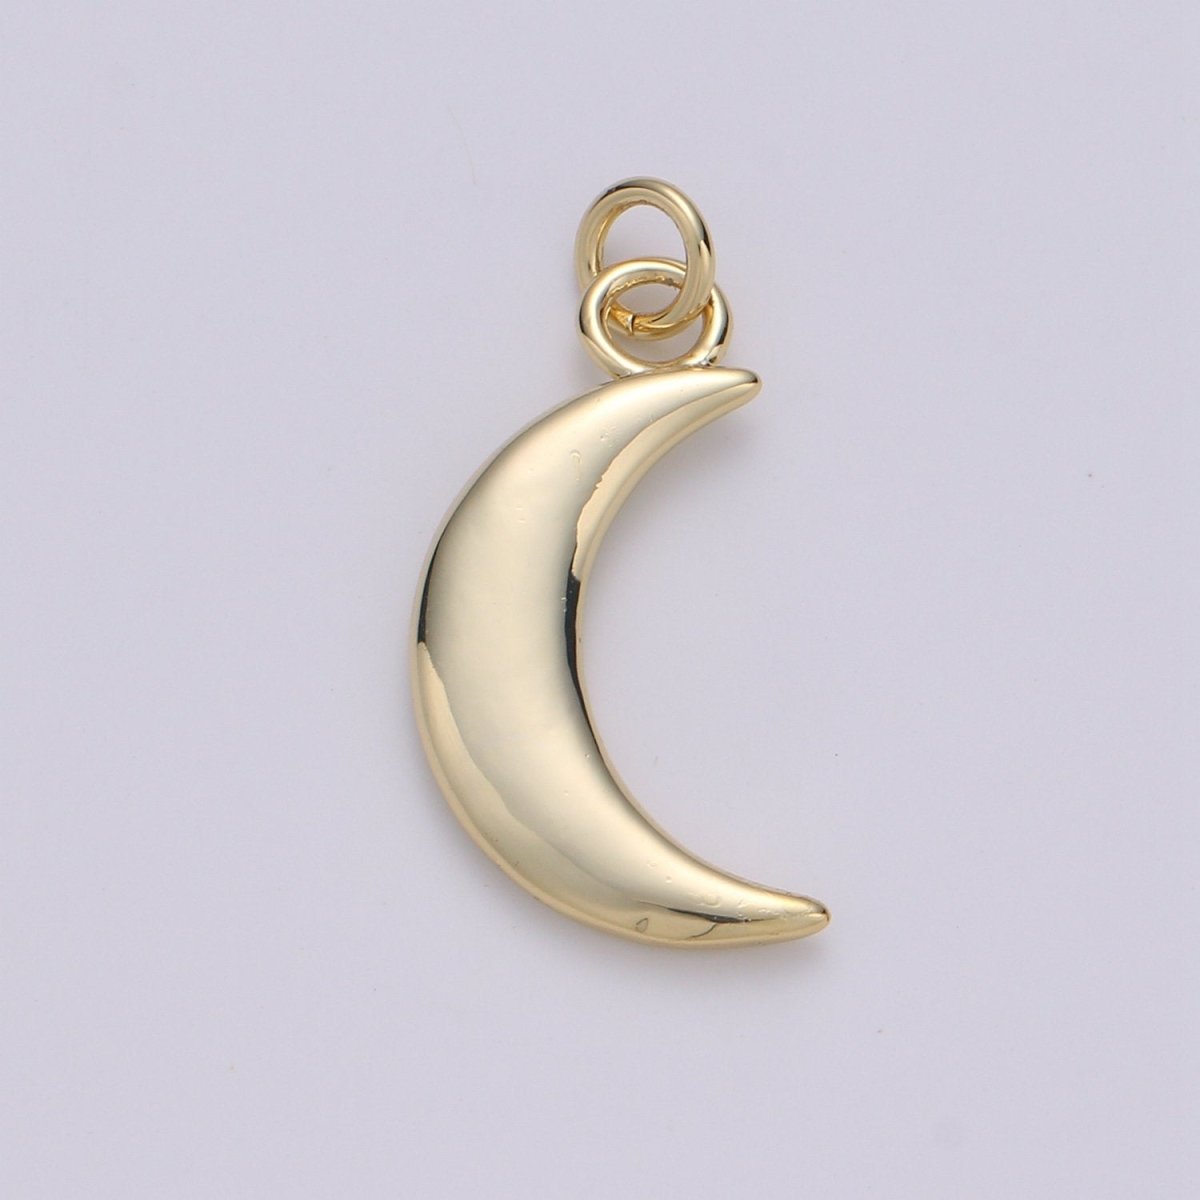 14k GF Crescent Moon Charm Necklace, Gold Moon Pendant Necklace, Celestial Gold Jewelry for Earing, Bracelet, Minimalist Jewelry - DLUXCA